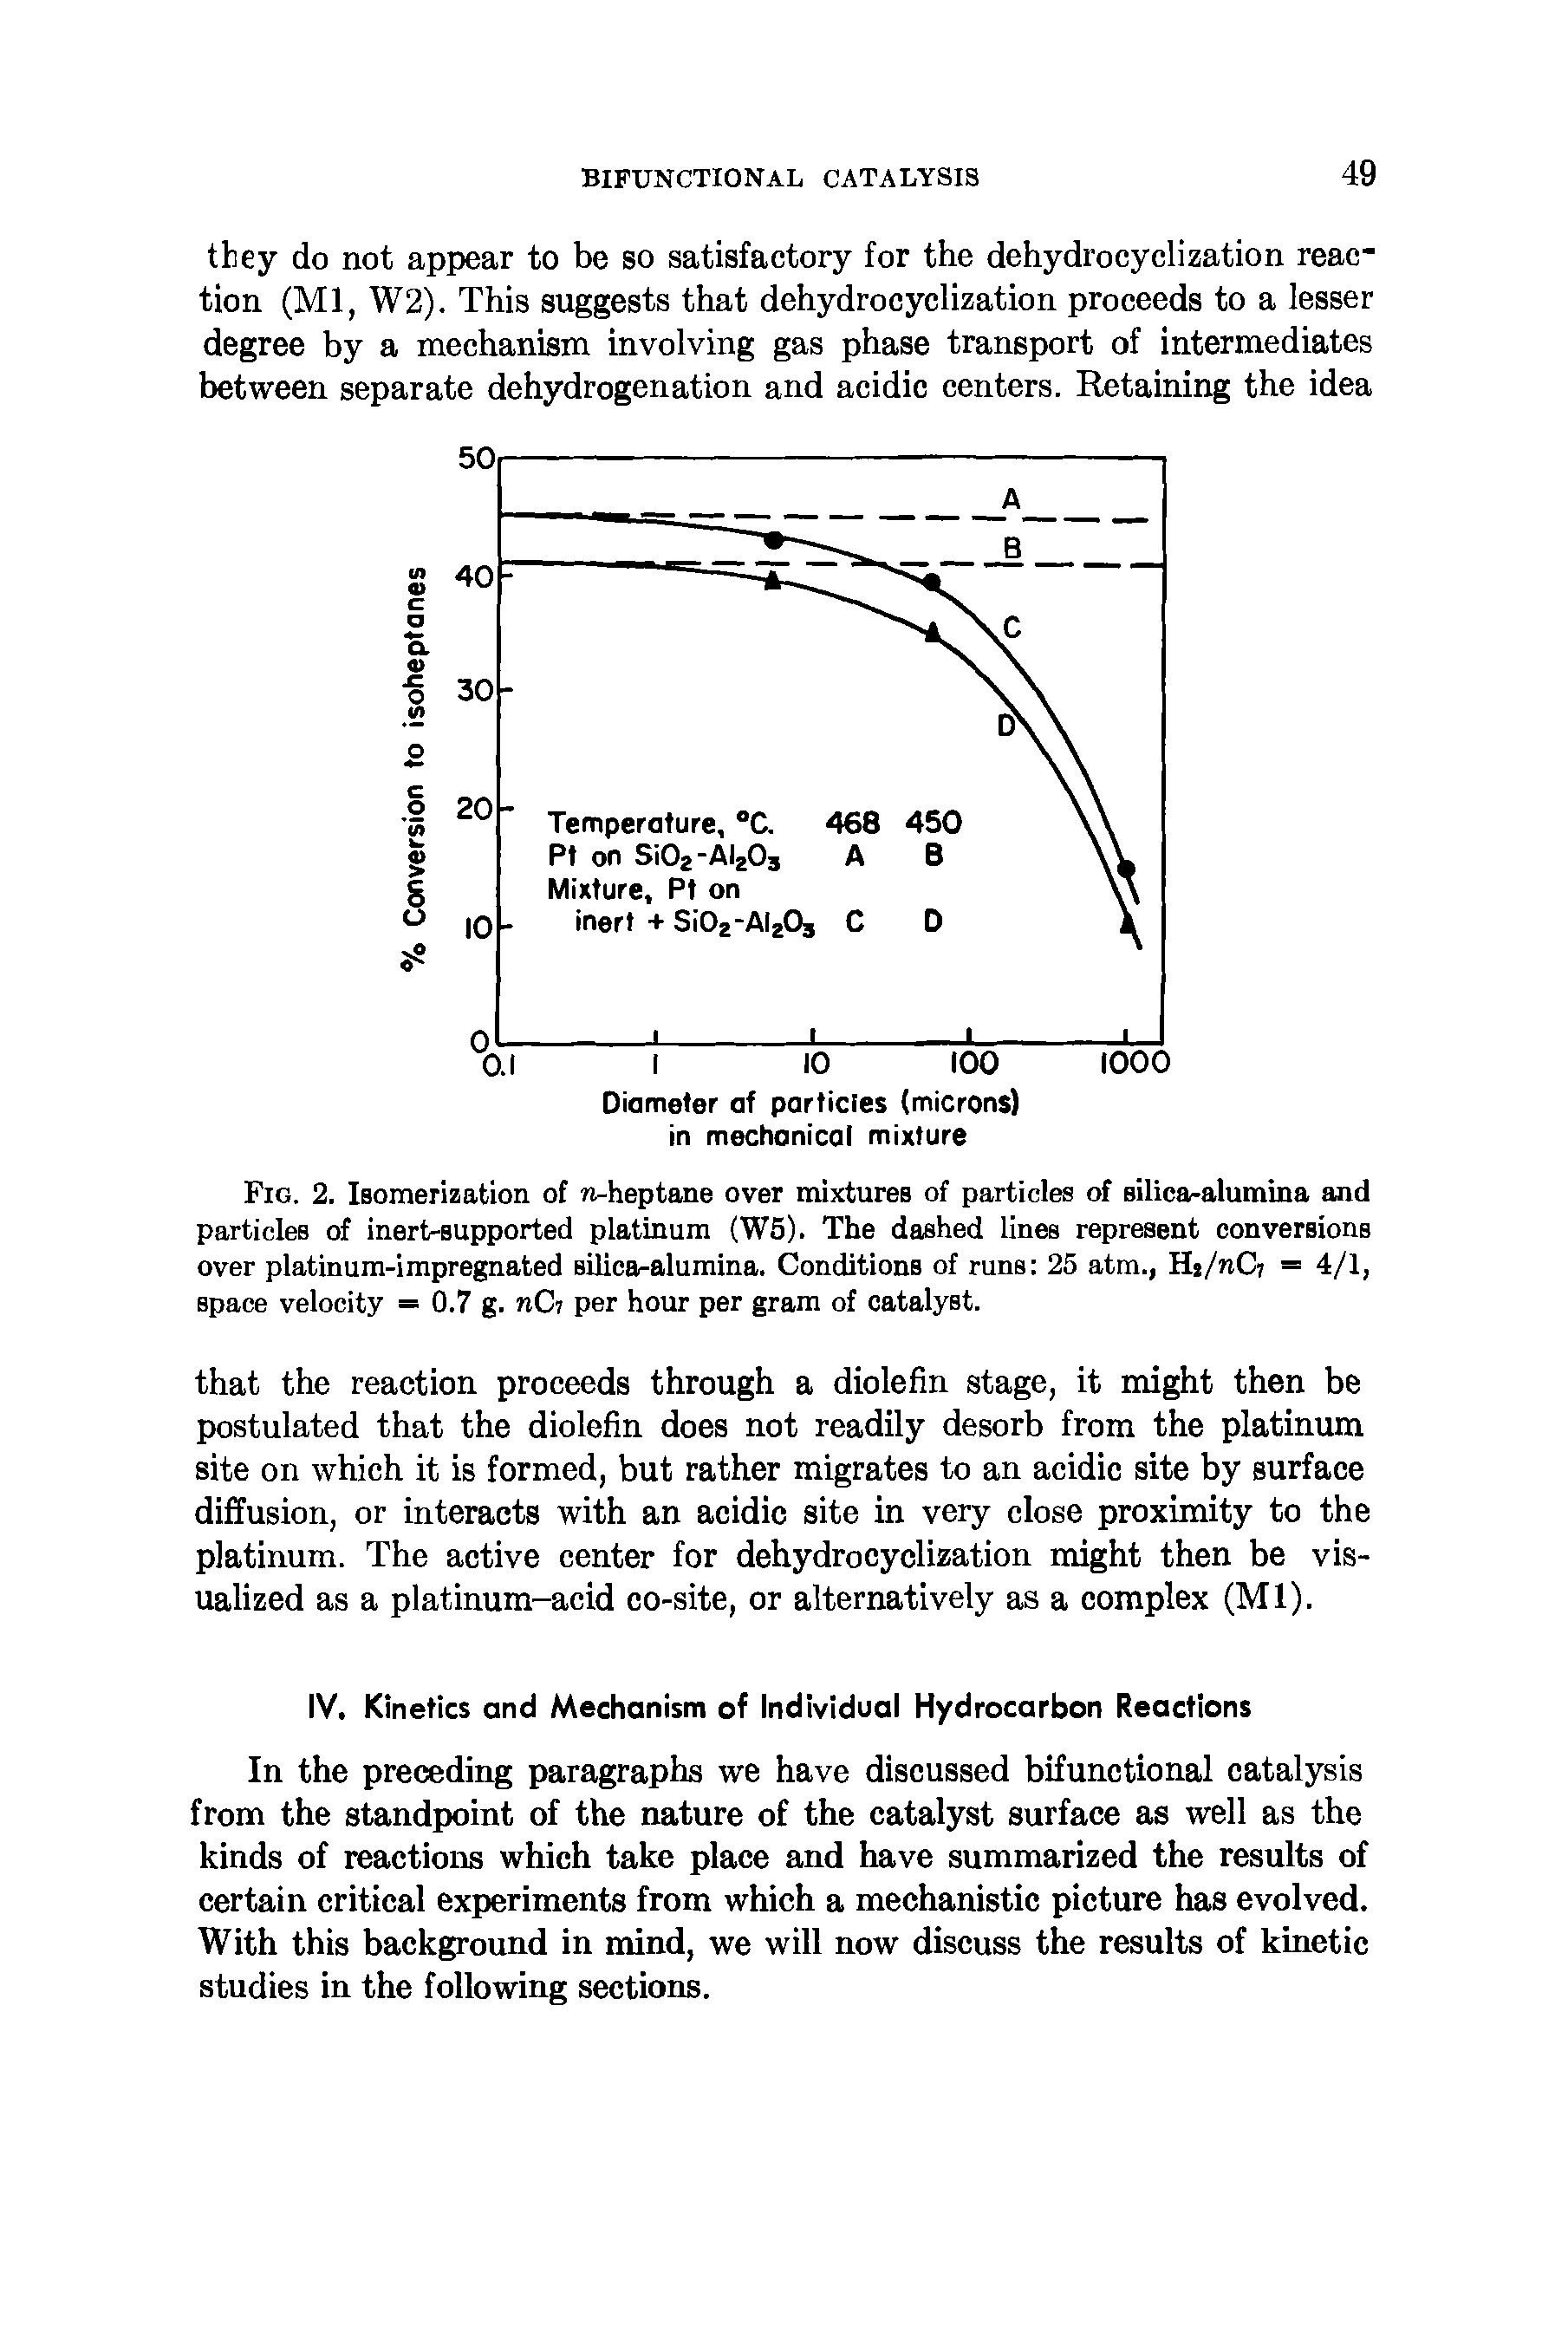 Fig. 2. Isomerization of n-heptane over mixtures of particles of silica-alumina and particles of inert-supported platinum (W5). The dashed lines represent conversions over platinum-impregnated silica-alumina. Conditions of runs 25 atm., Hj/nC = 4/1, space velocity = 0.7 g. nC7 per hour per gram of catalyst.